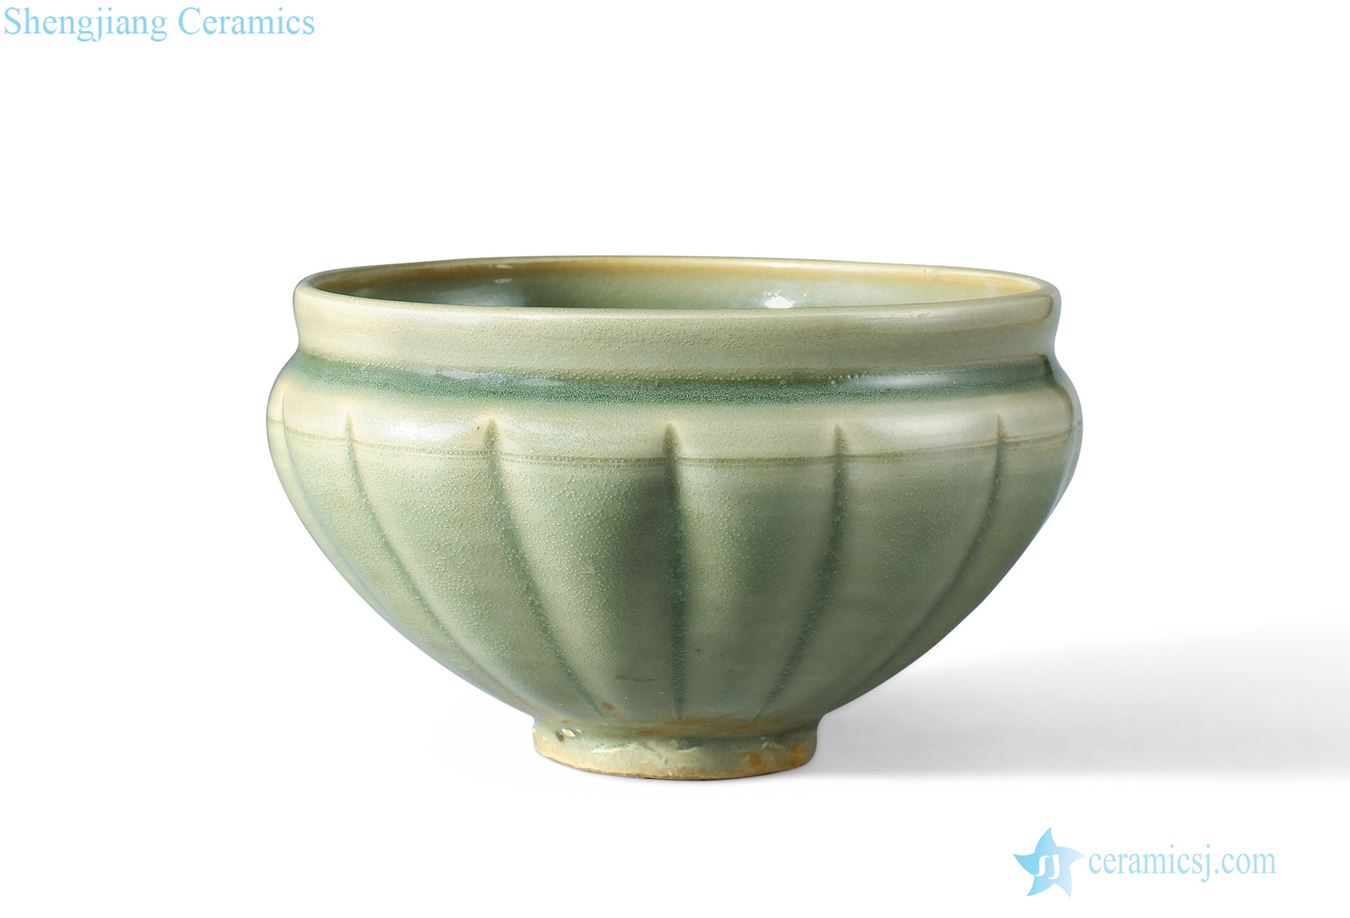 Northern song dynasty (960 ~ 1127) and gold (1115 ~ 1234) yao state kiln green glaze melon leng in bowl